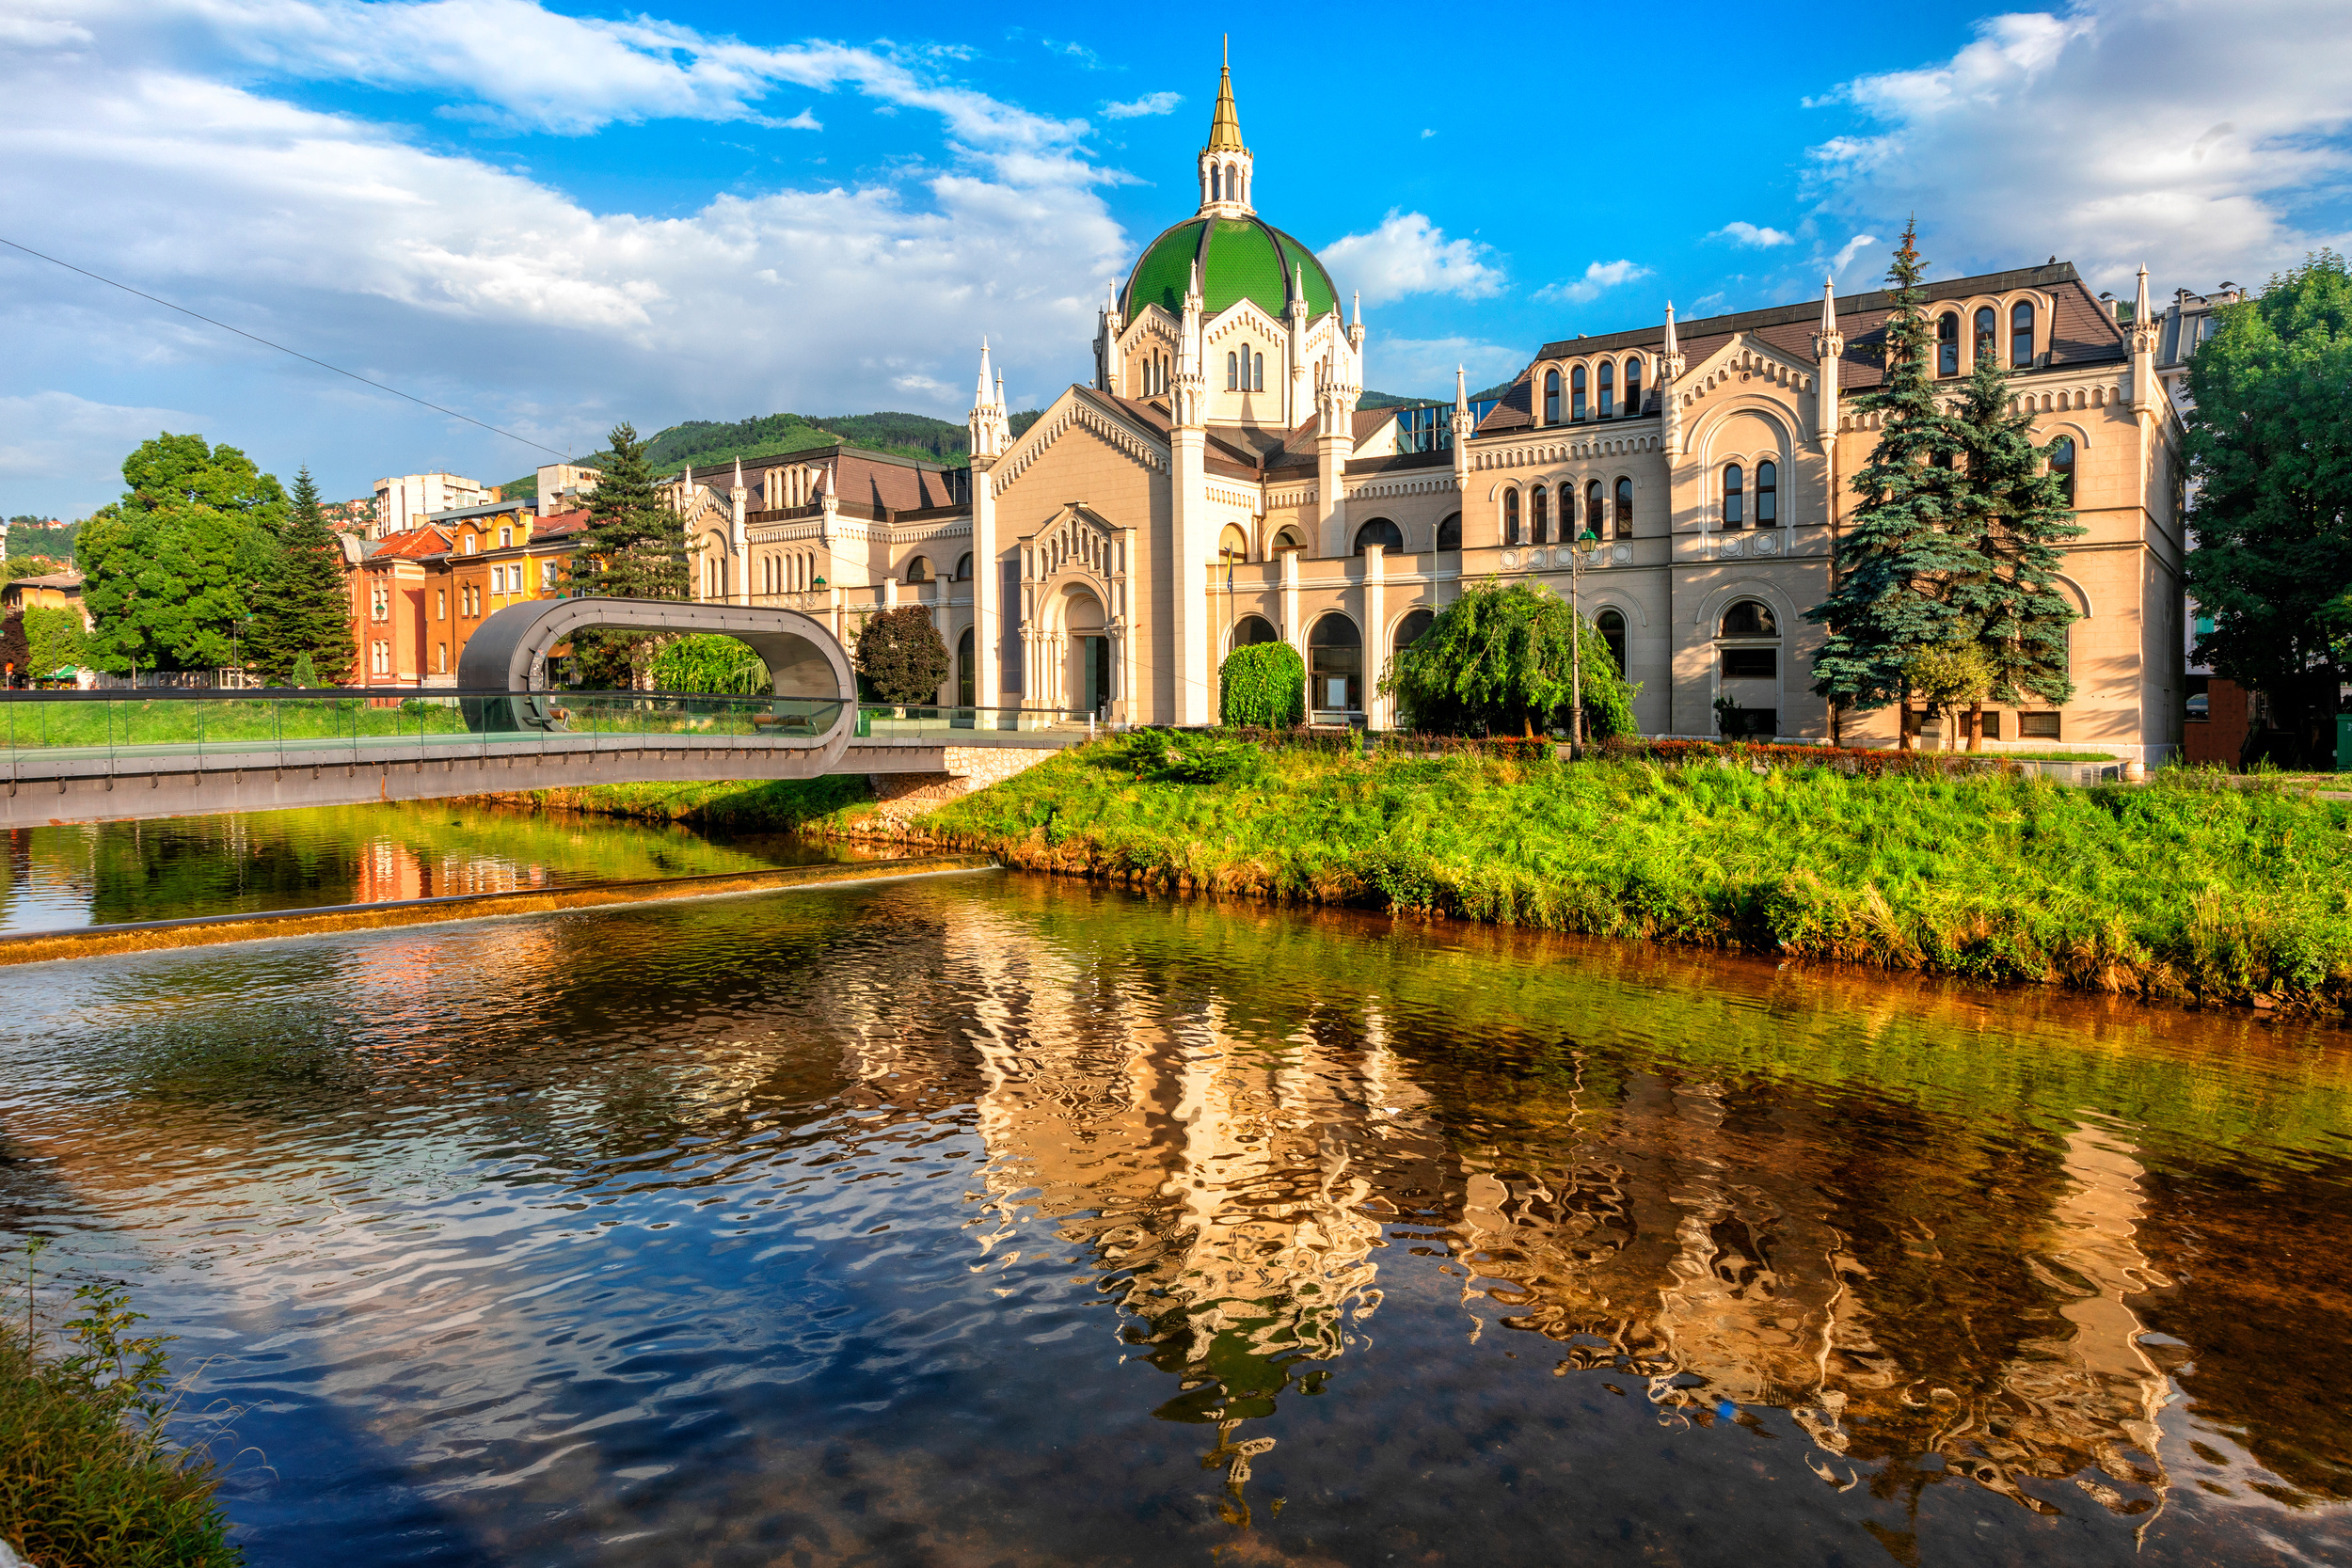 <p>Croatia isn’t the only Balkan country with amazing cheese. The capital of Bosnia & Herzegovina has great restaurants where you’ll find a local favorite — livno is on most menus. </p><p>You may also like: <a href='https://www.yardbarker.com/lifestyle/articles/18_things_you_think_are_normal_but_are_actually_uniquely_american_012324/s1__39111167'>18 things you think are normal but are actually uniquely American</a></p>